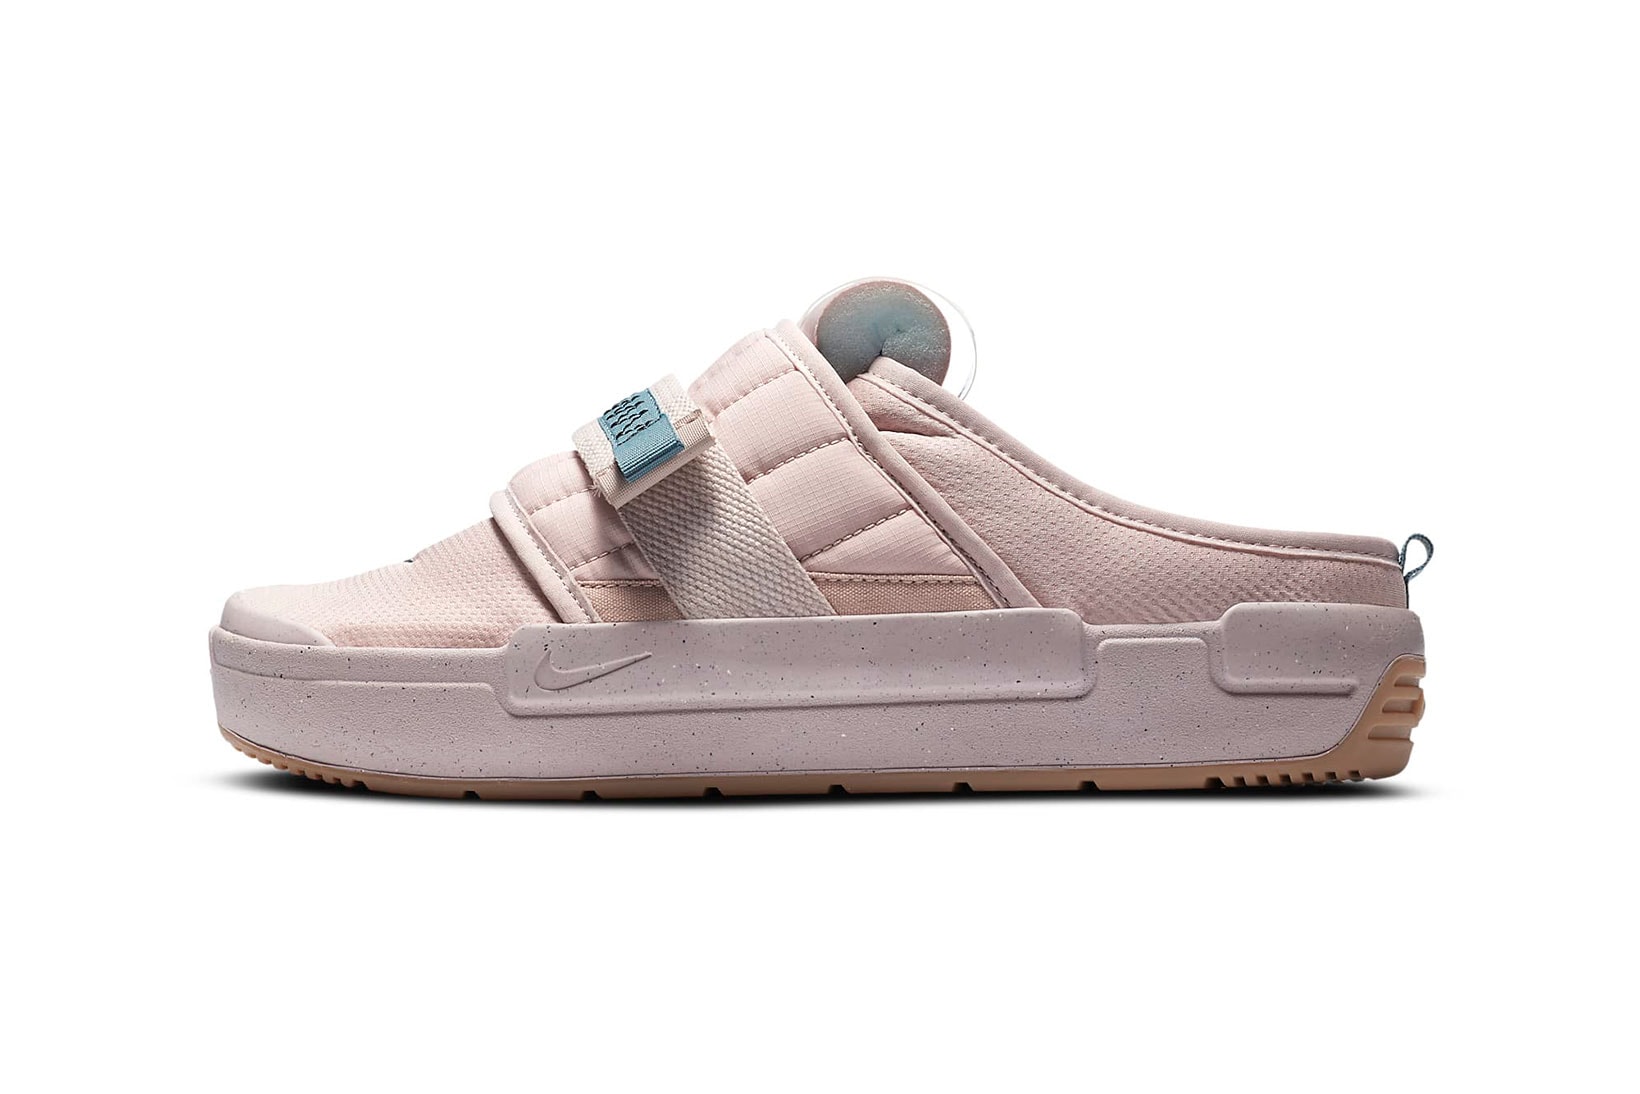 nike offline mules sandals slippers dusty pink colorway footwear shoes stone mauve